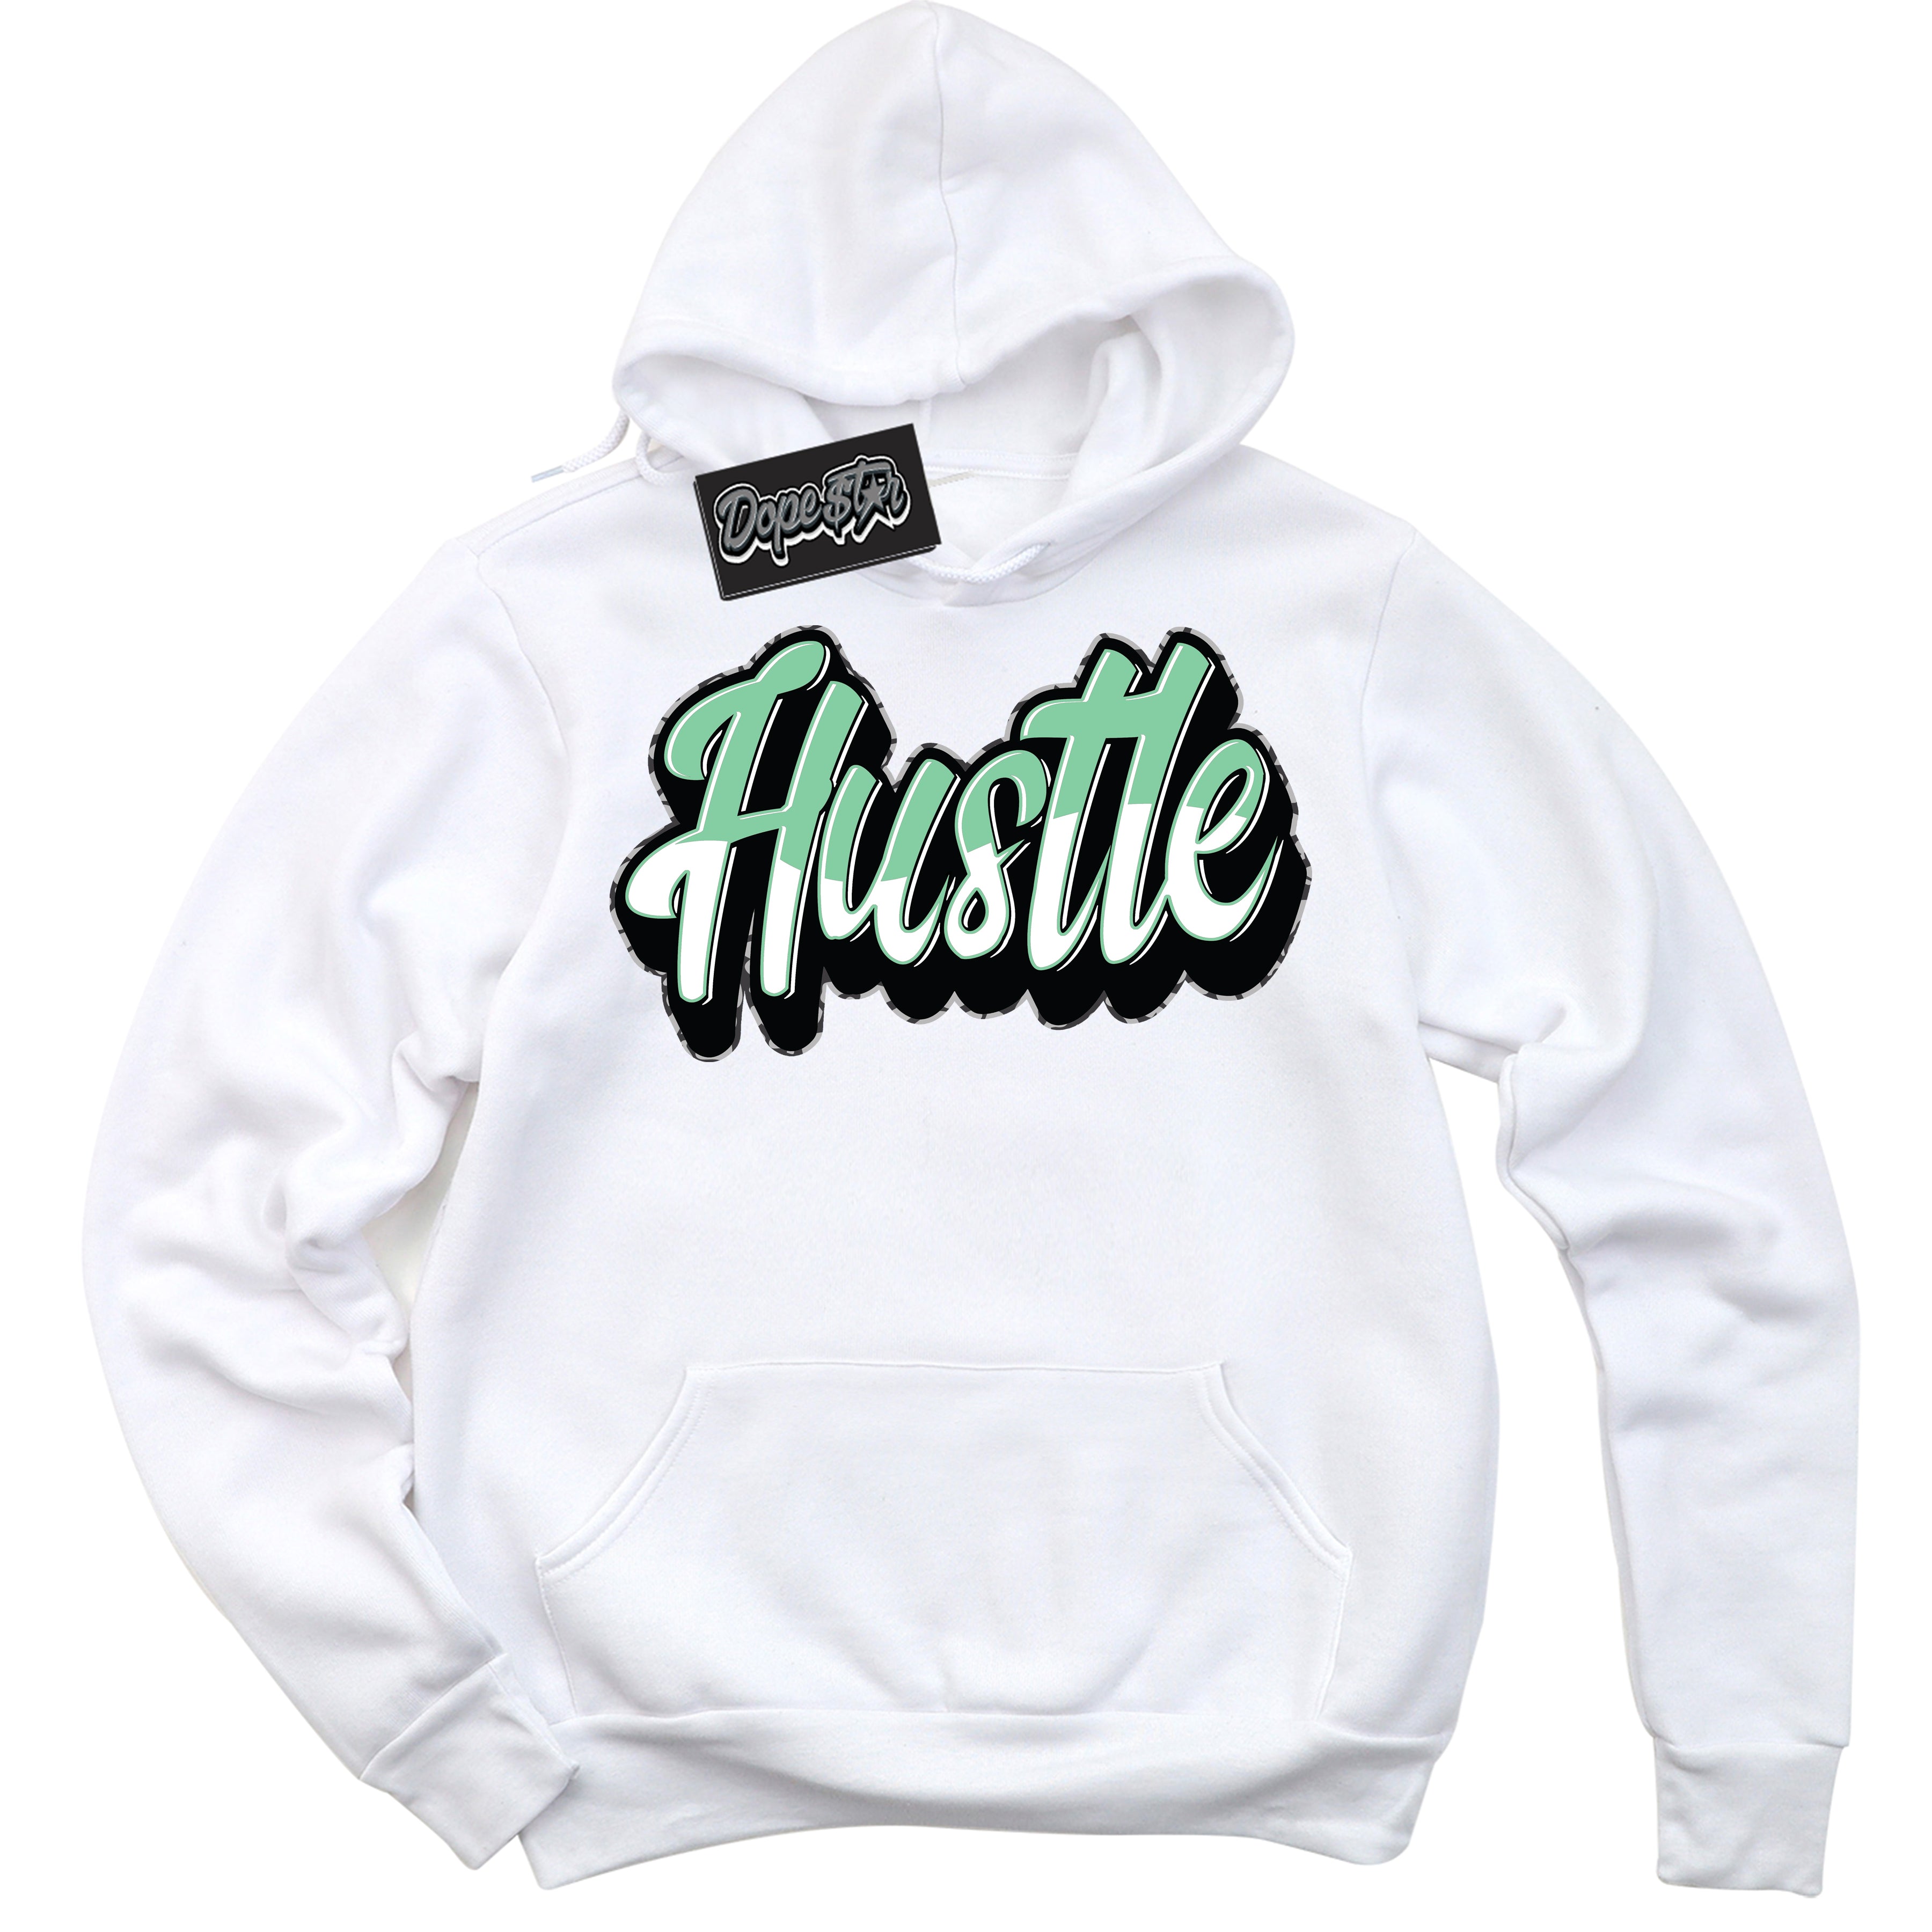 Cool White Graphic DopeStar Hoodie with “ Hustle 2 “ print, that perfectly matches Green Glow 3s sneakers